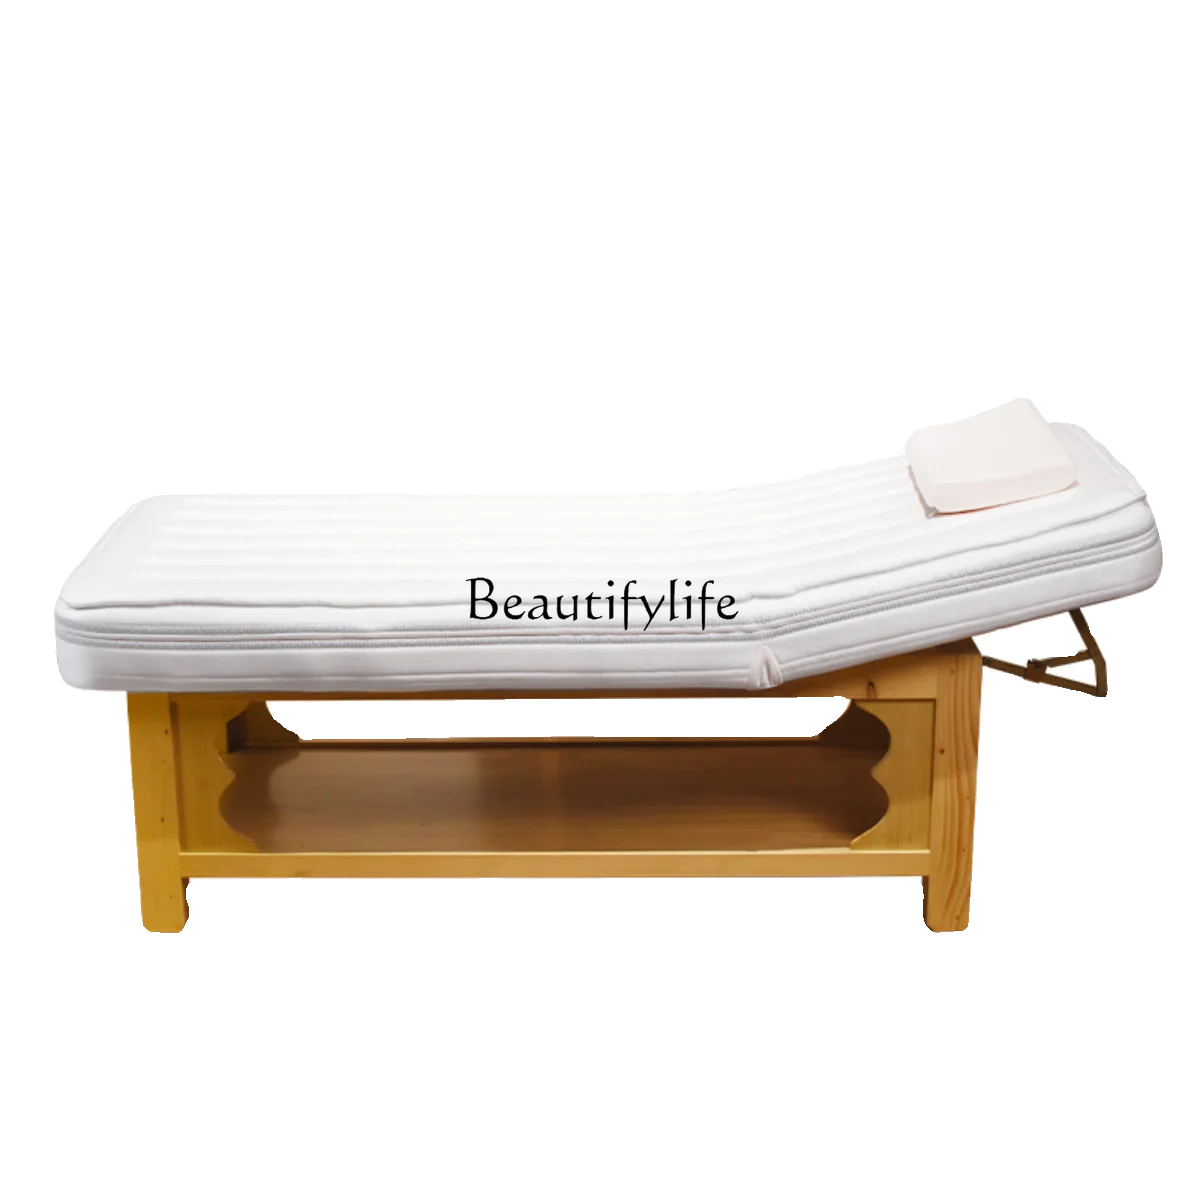 Solid Wood Latex Facial Bed Beauty Salon Special Medical Massage Physiotherapy Bed facial bed whole body constant temperature water bed electric lifting physiotherapy bed colorful solid wood massage couch